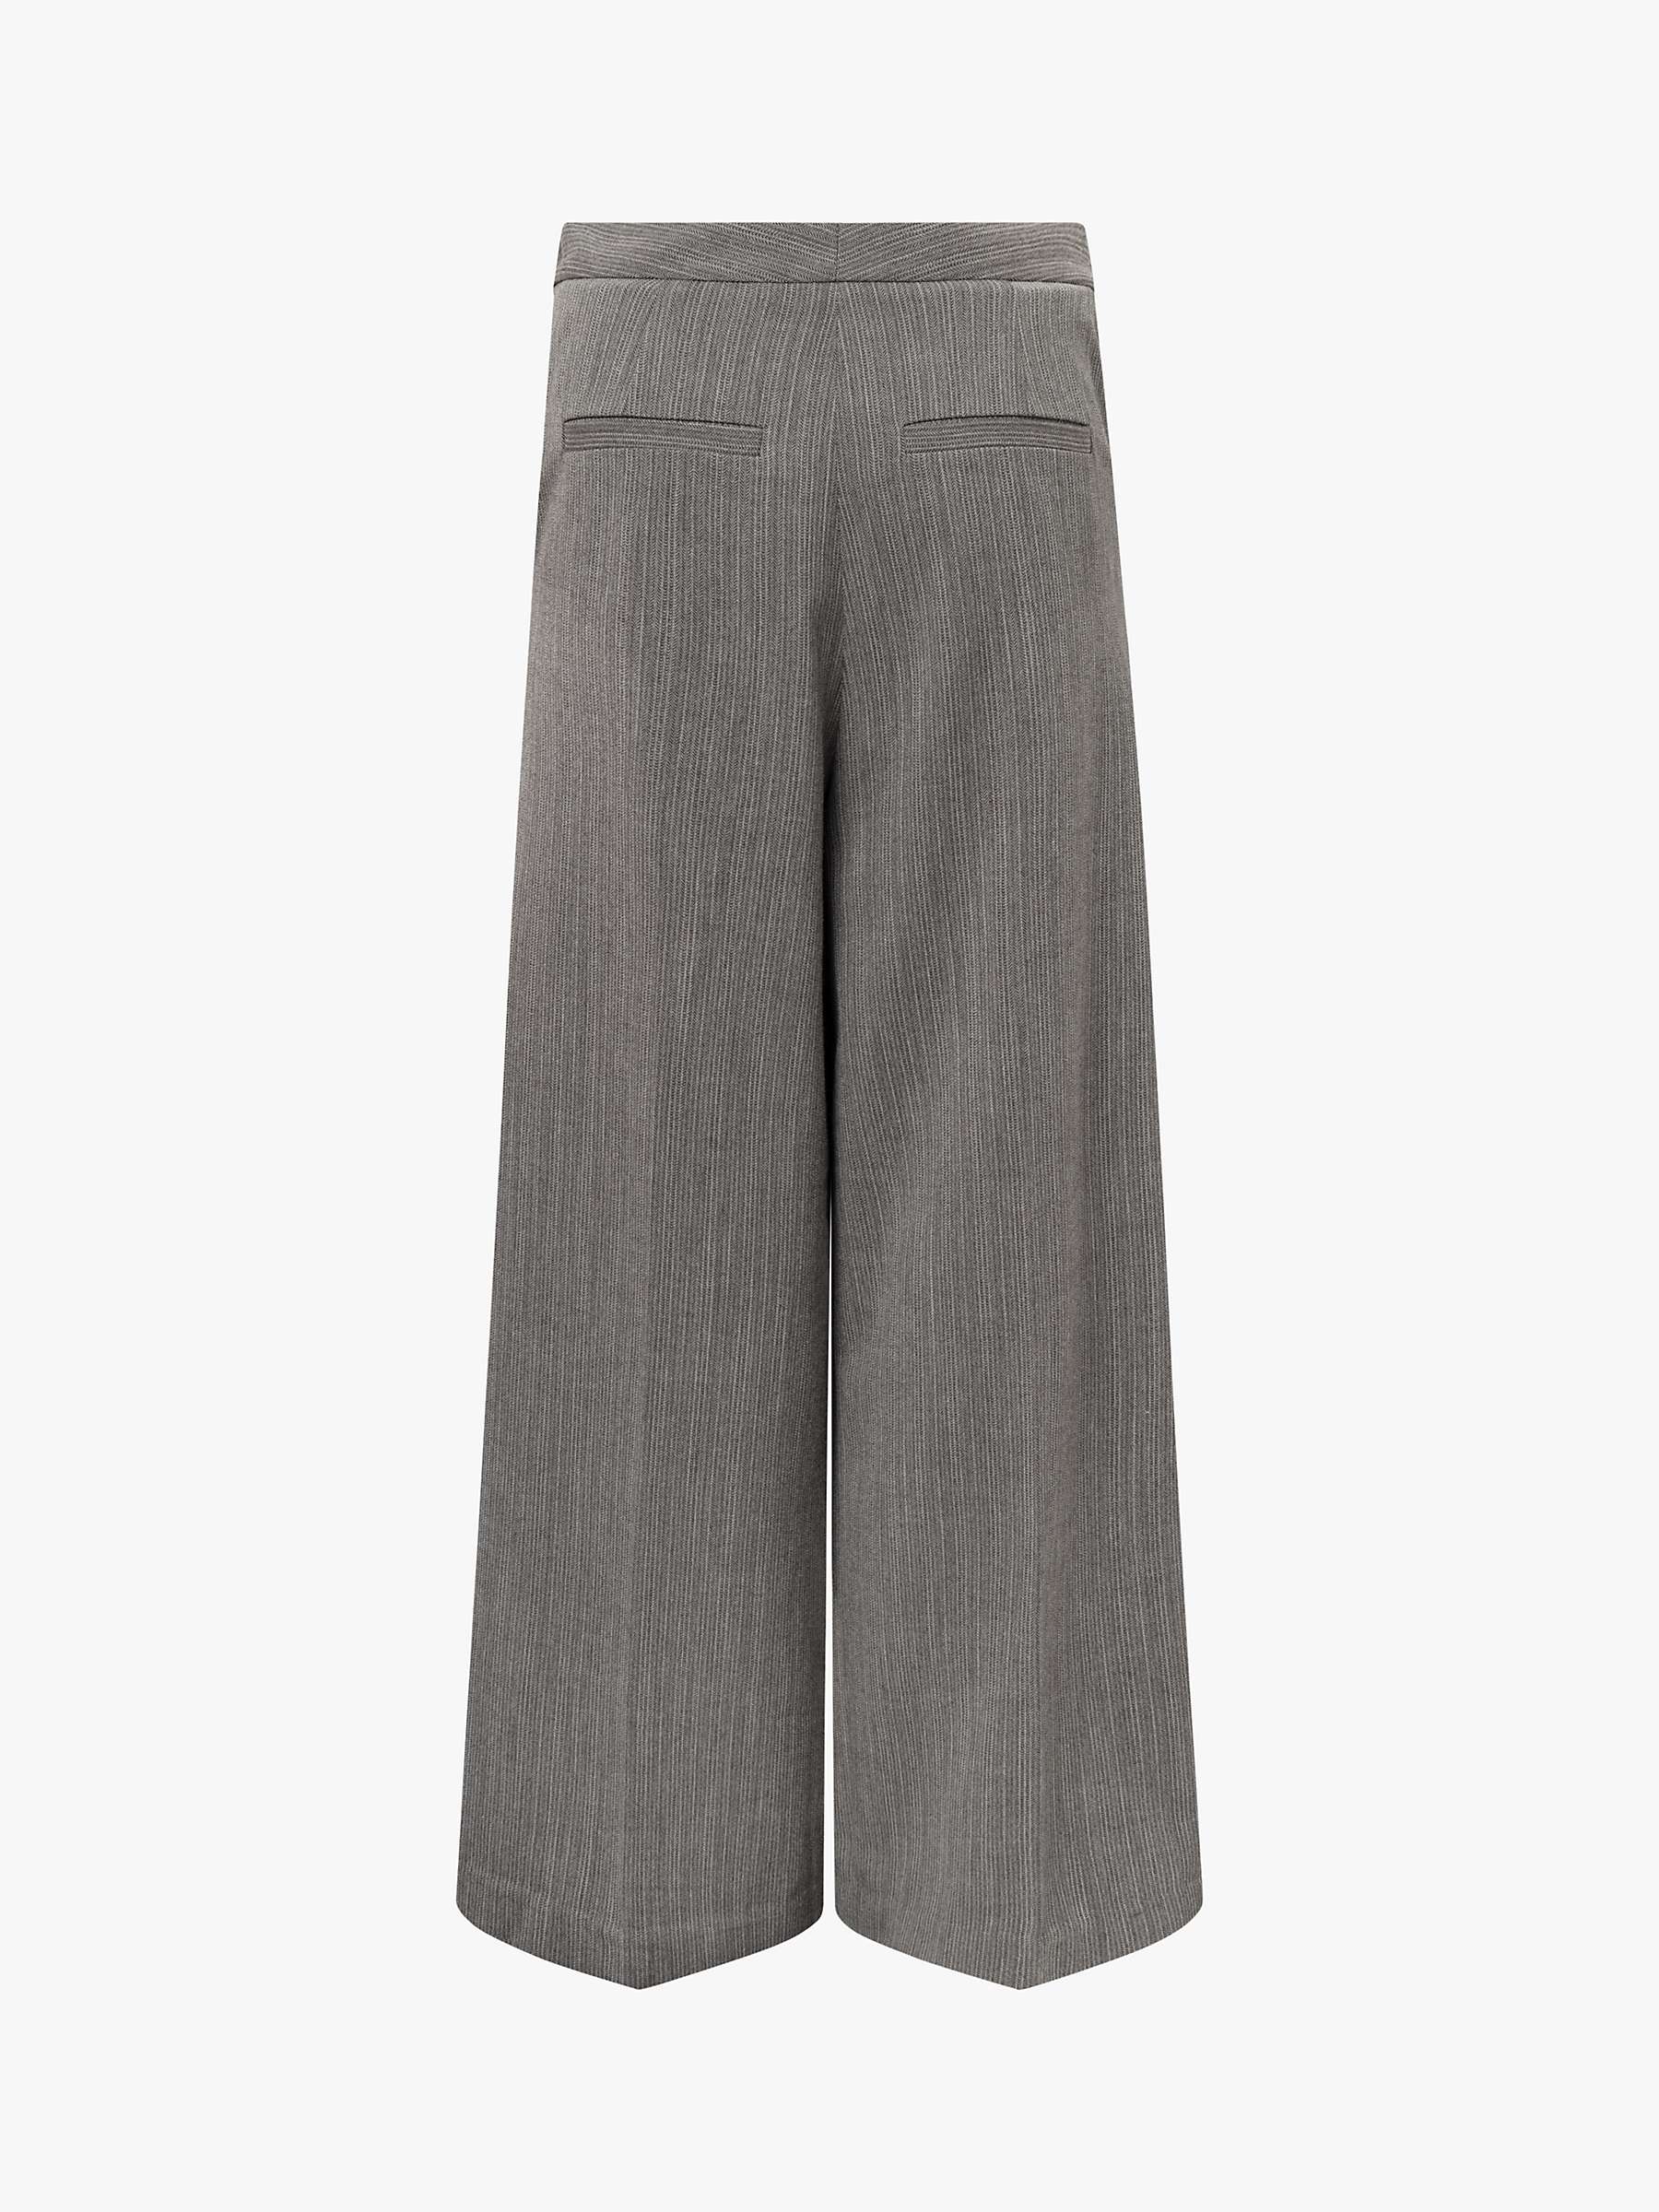 Buy Lovechild 1979 Tabitha Wrap Waist Tailored Trousers, Grey Melange Online at johnlewis.com